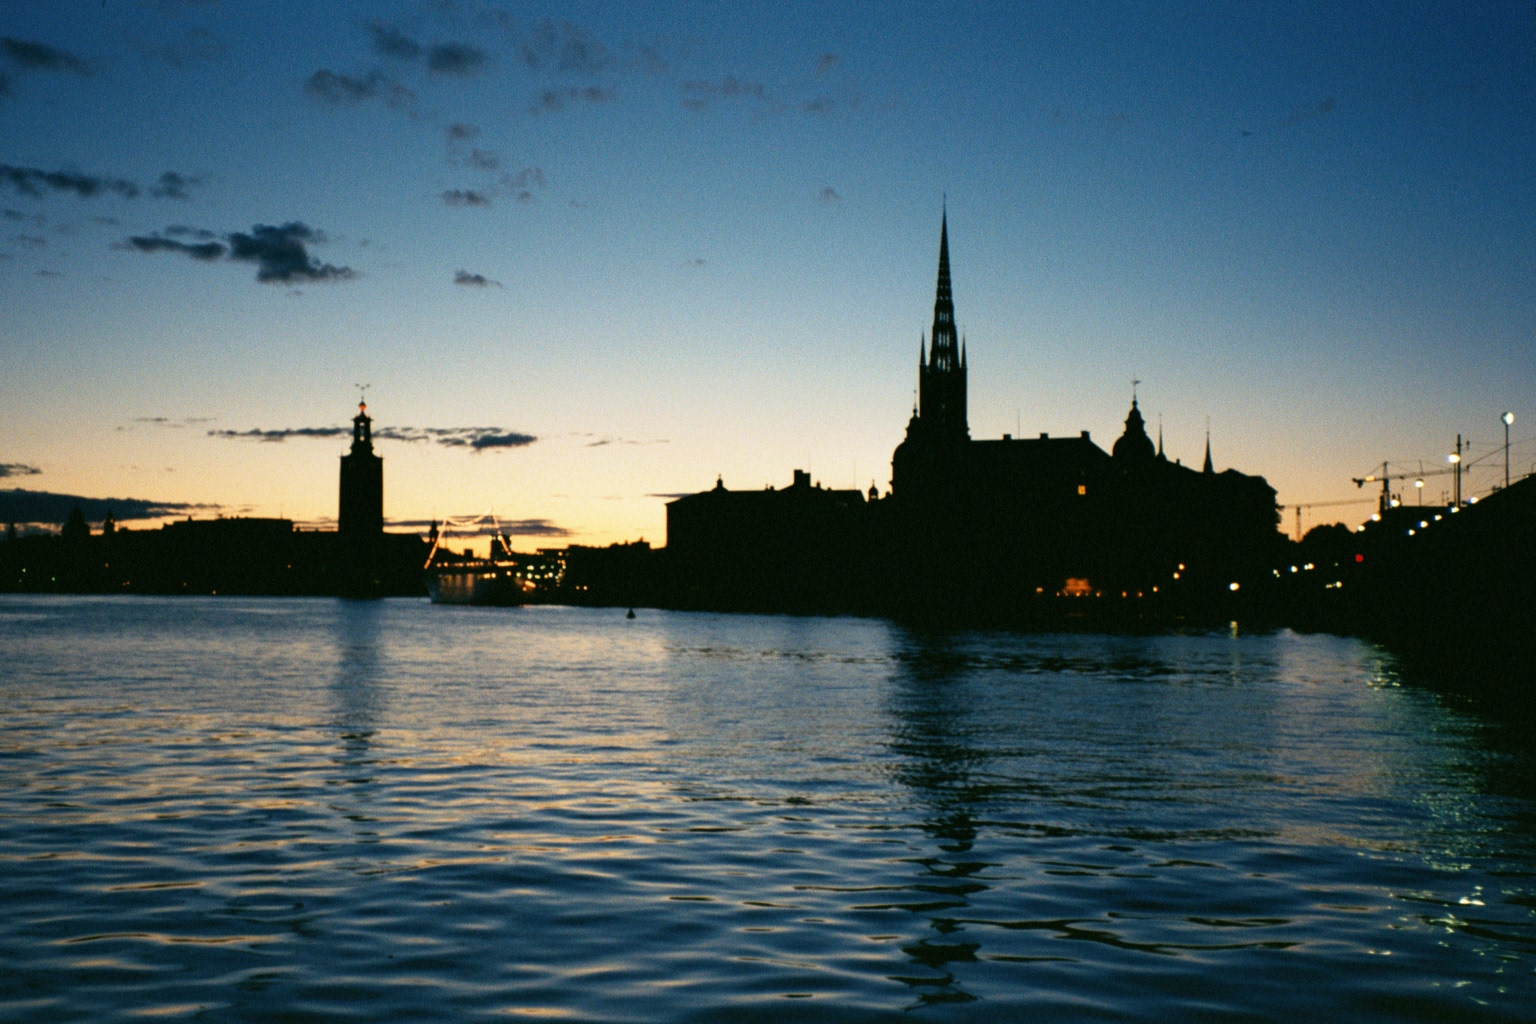 View of the city tower and old city of Stockholm